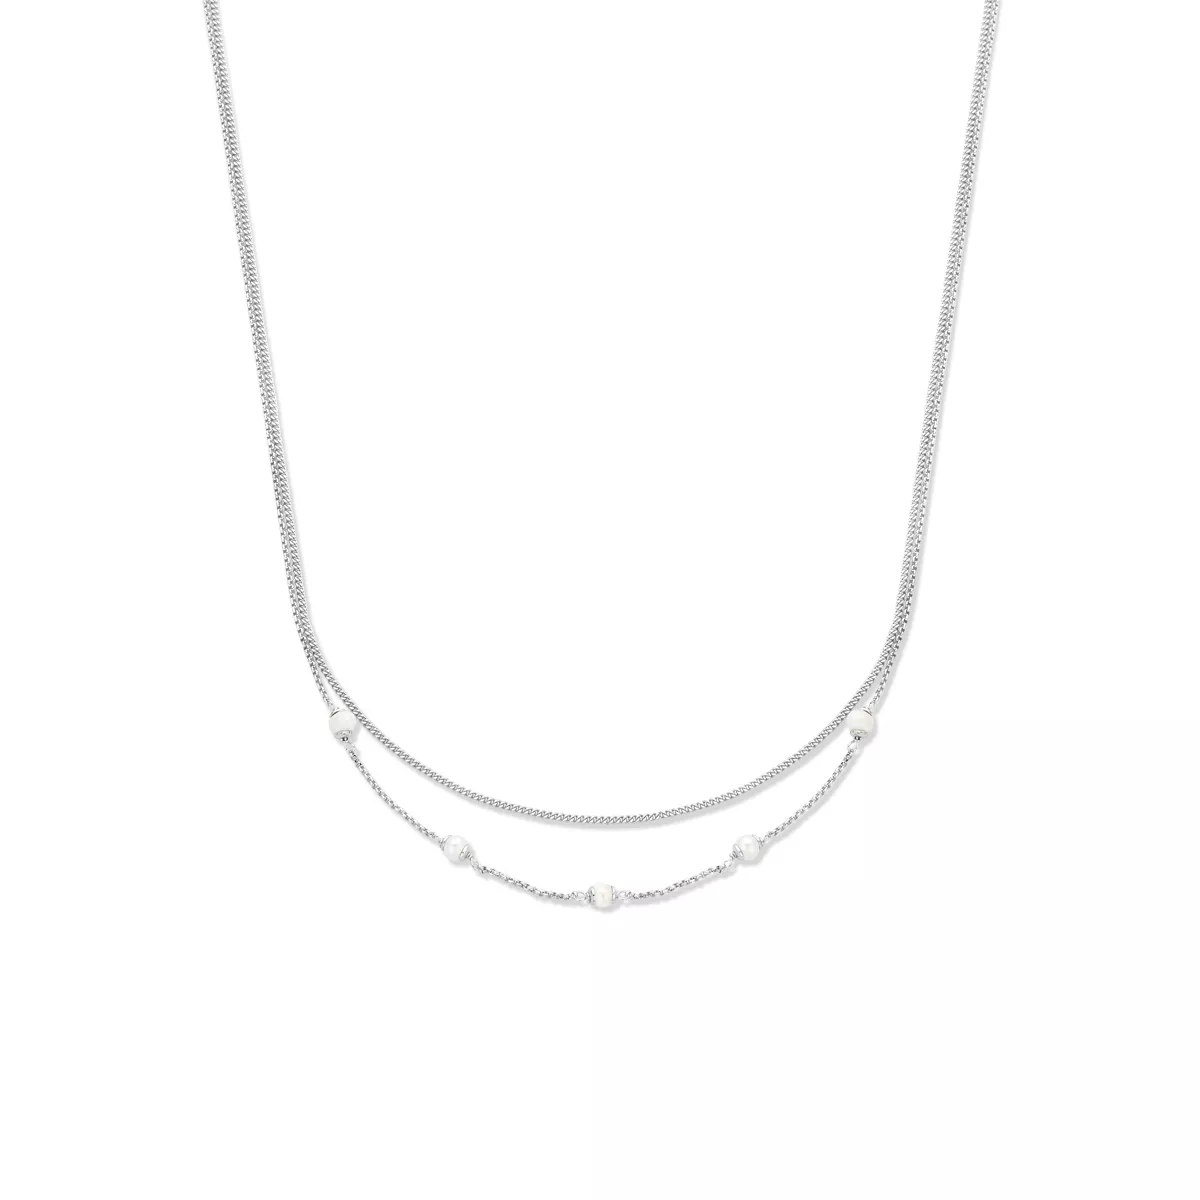 Ketting Multi zilver-zoetwaterparel wit 41-45 cm 